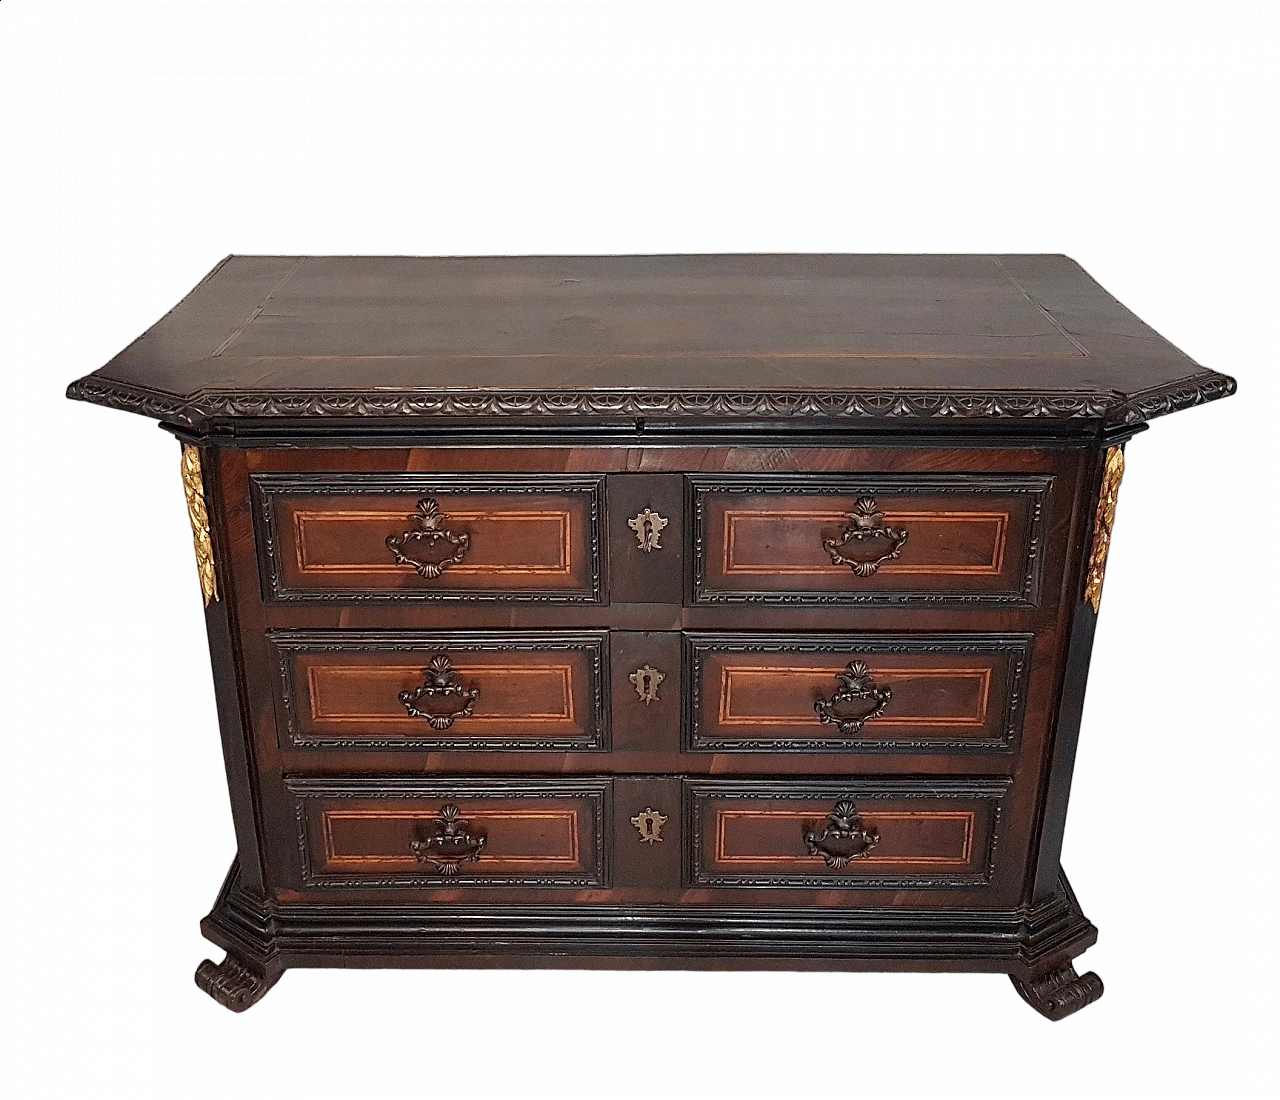 Walnut chest of drawers panelled and inlaid on the front, late 17th century 17